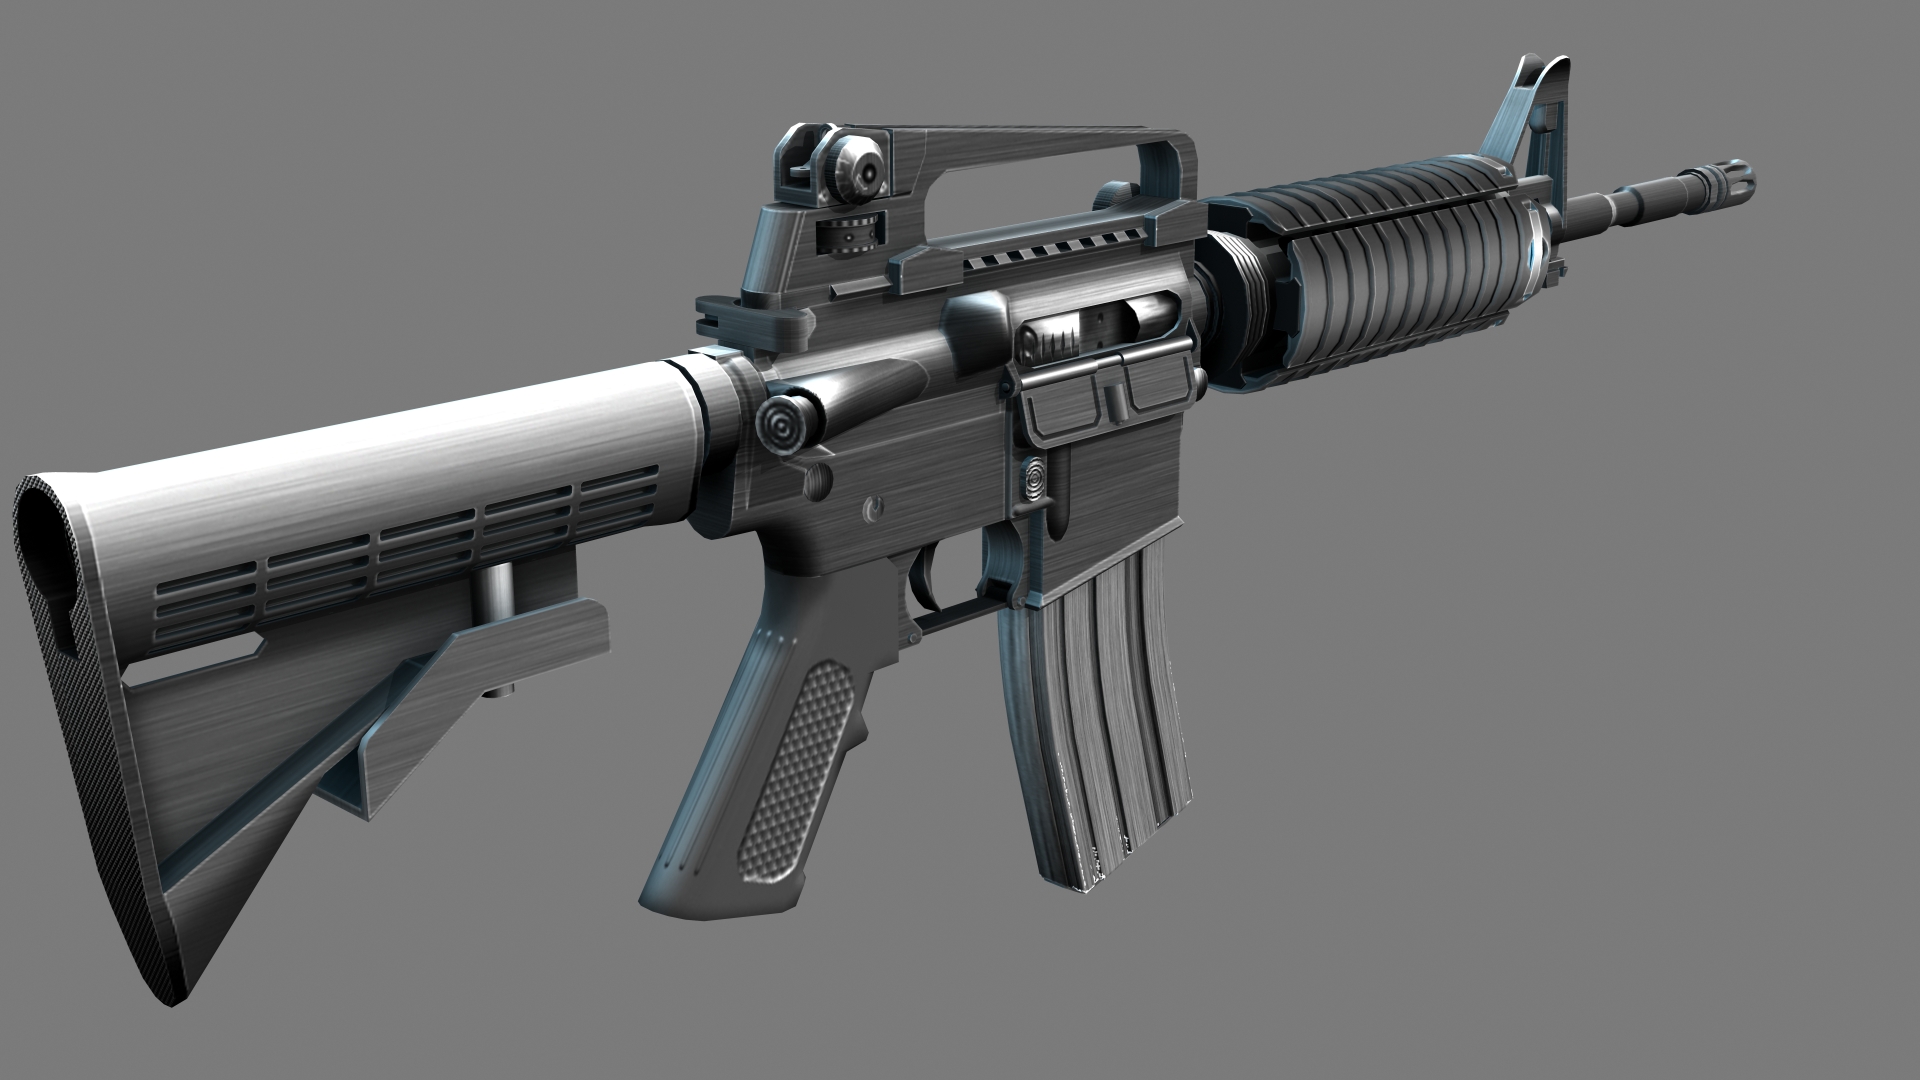 M4a1 New - M4a1 Rifle , HD Wallpaper & Backgrounds